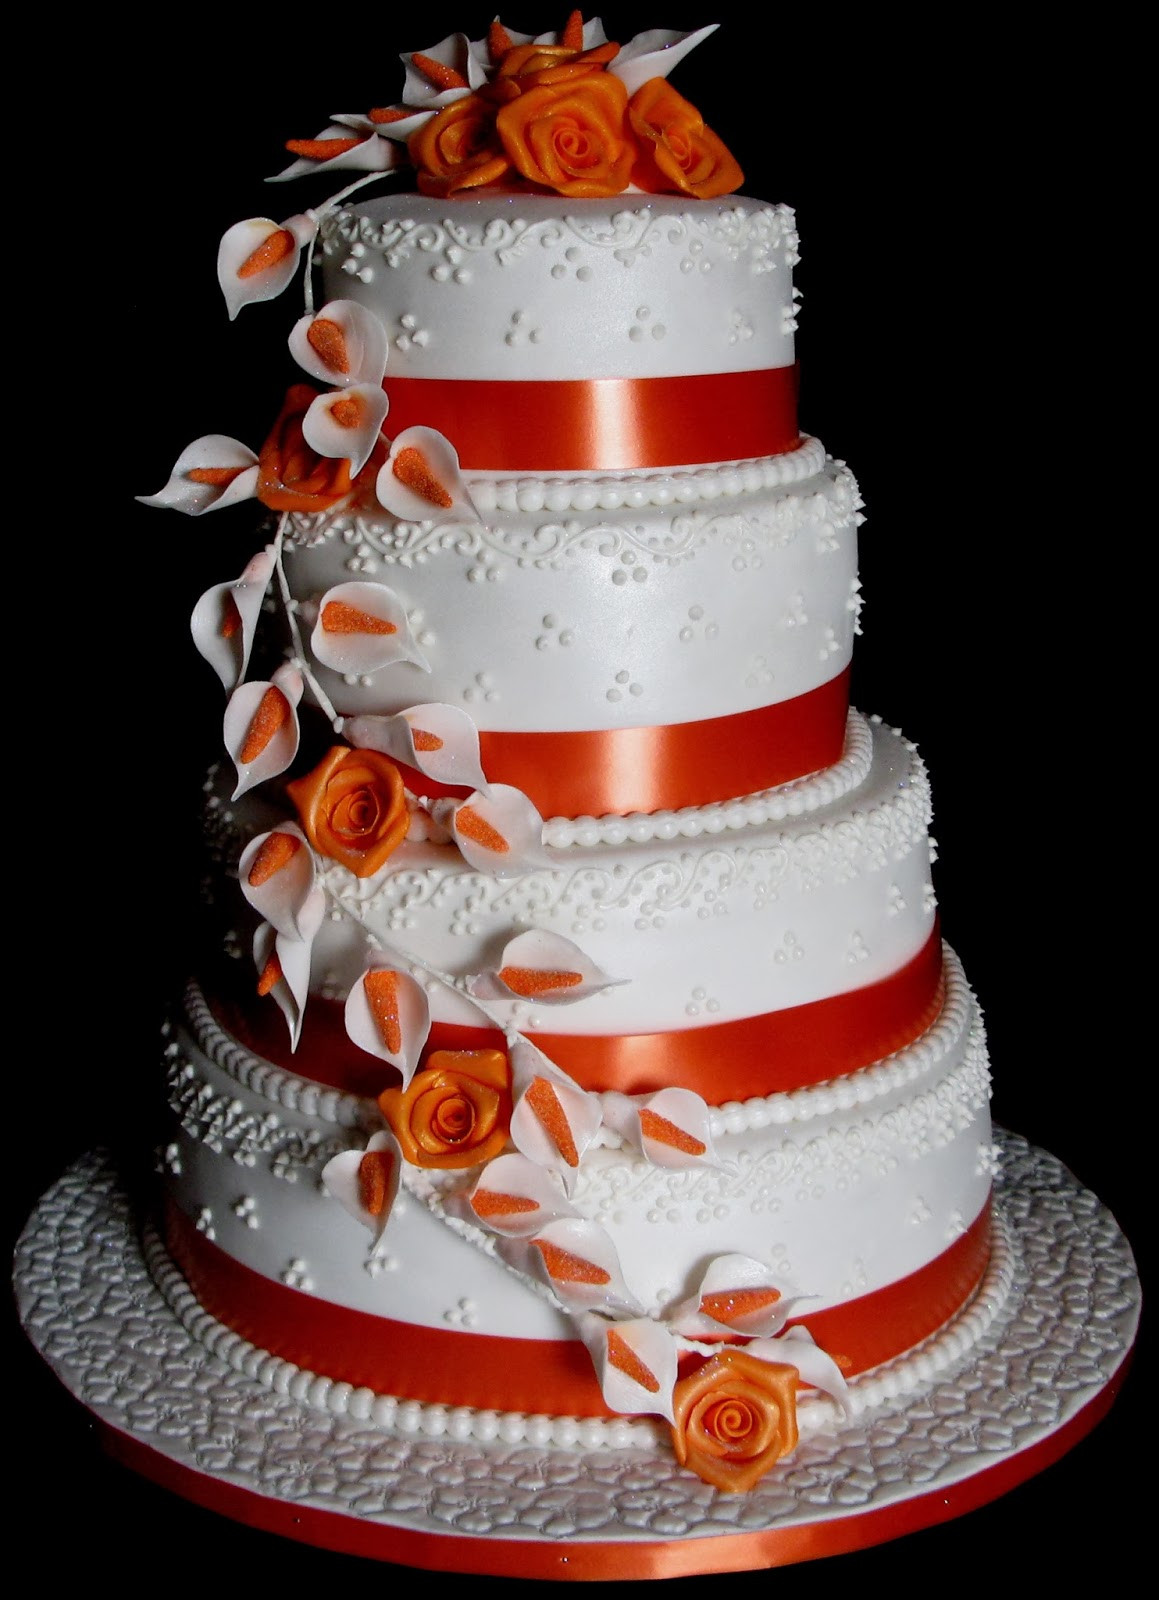 4 Layered Wedding Cakes 20 Of the Best Ideas for Sugarcraft by soni Four Layer Wedding Cake Roses and Lilies